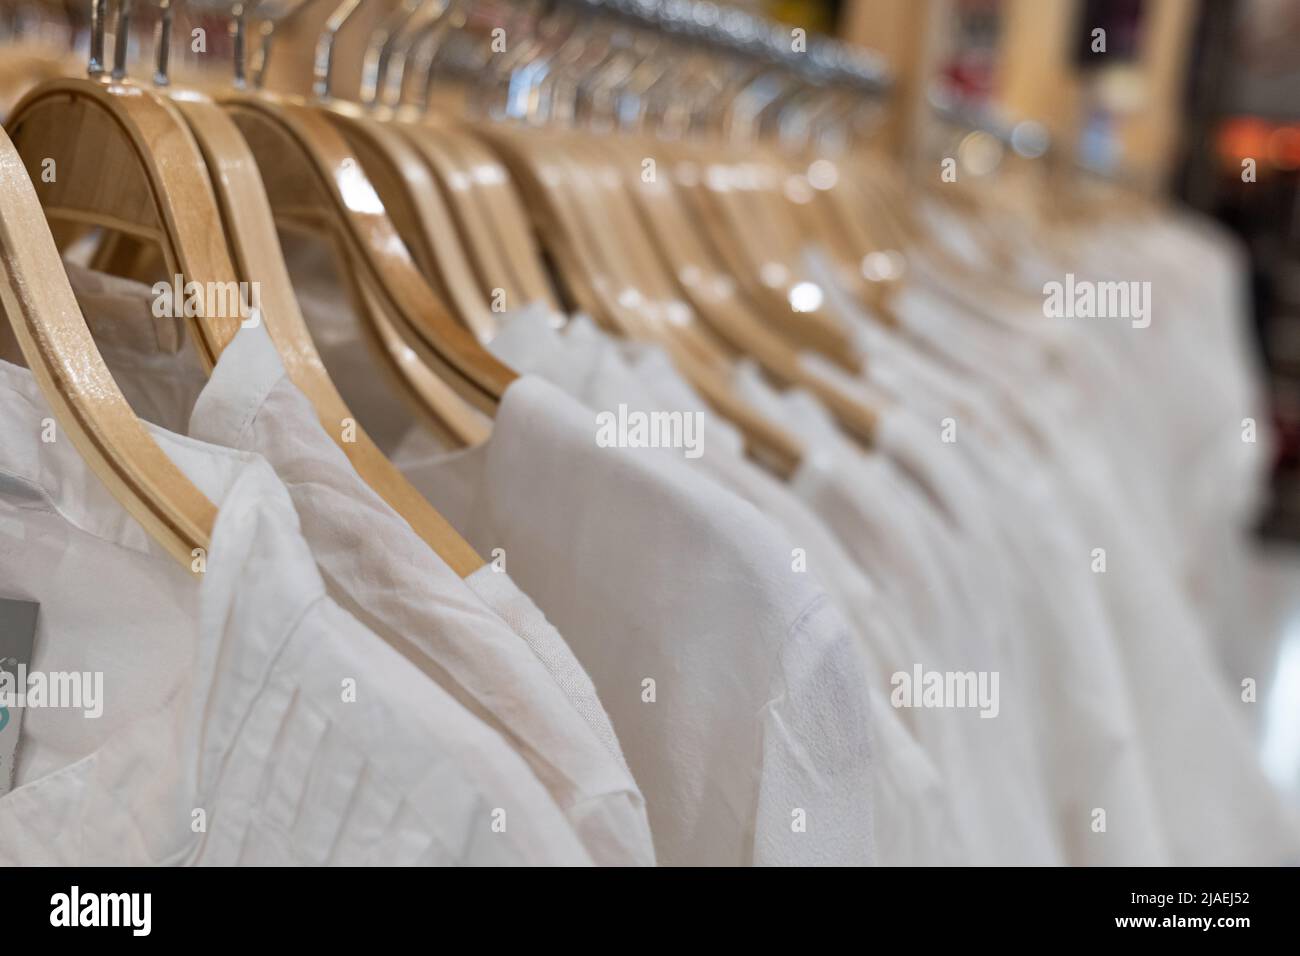 White clothes hanging on wood racks. Clothing for women hanging on hangers in shopping mall for sale. Stock Photo